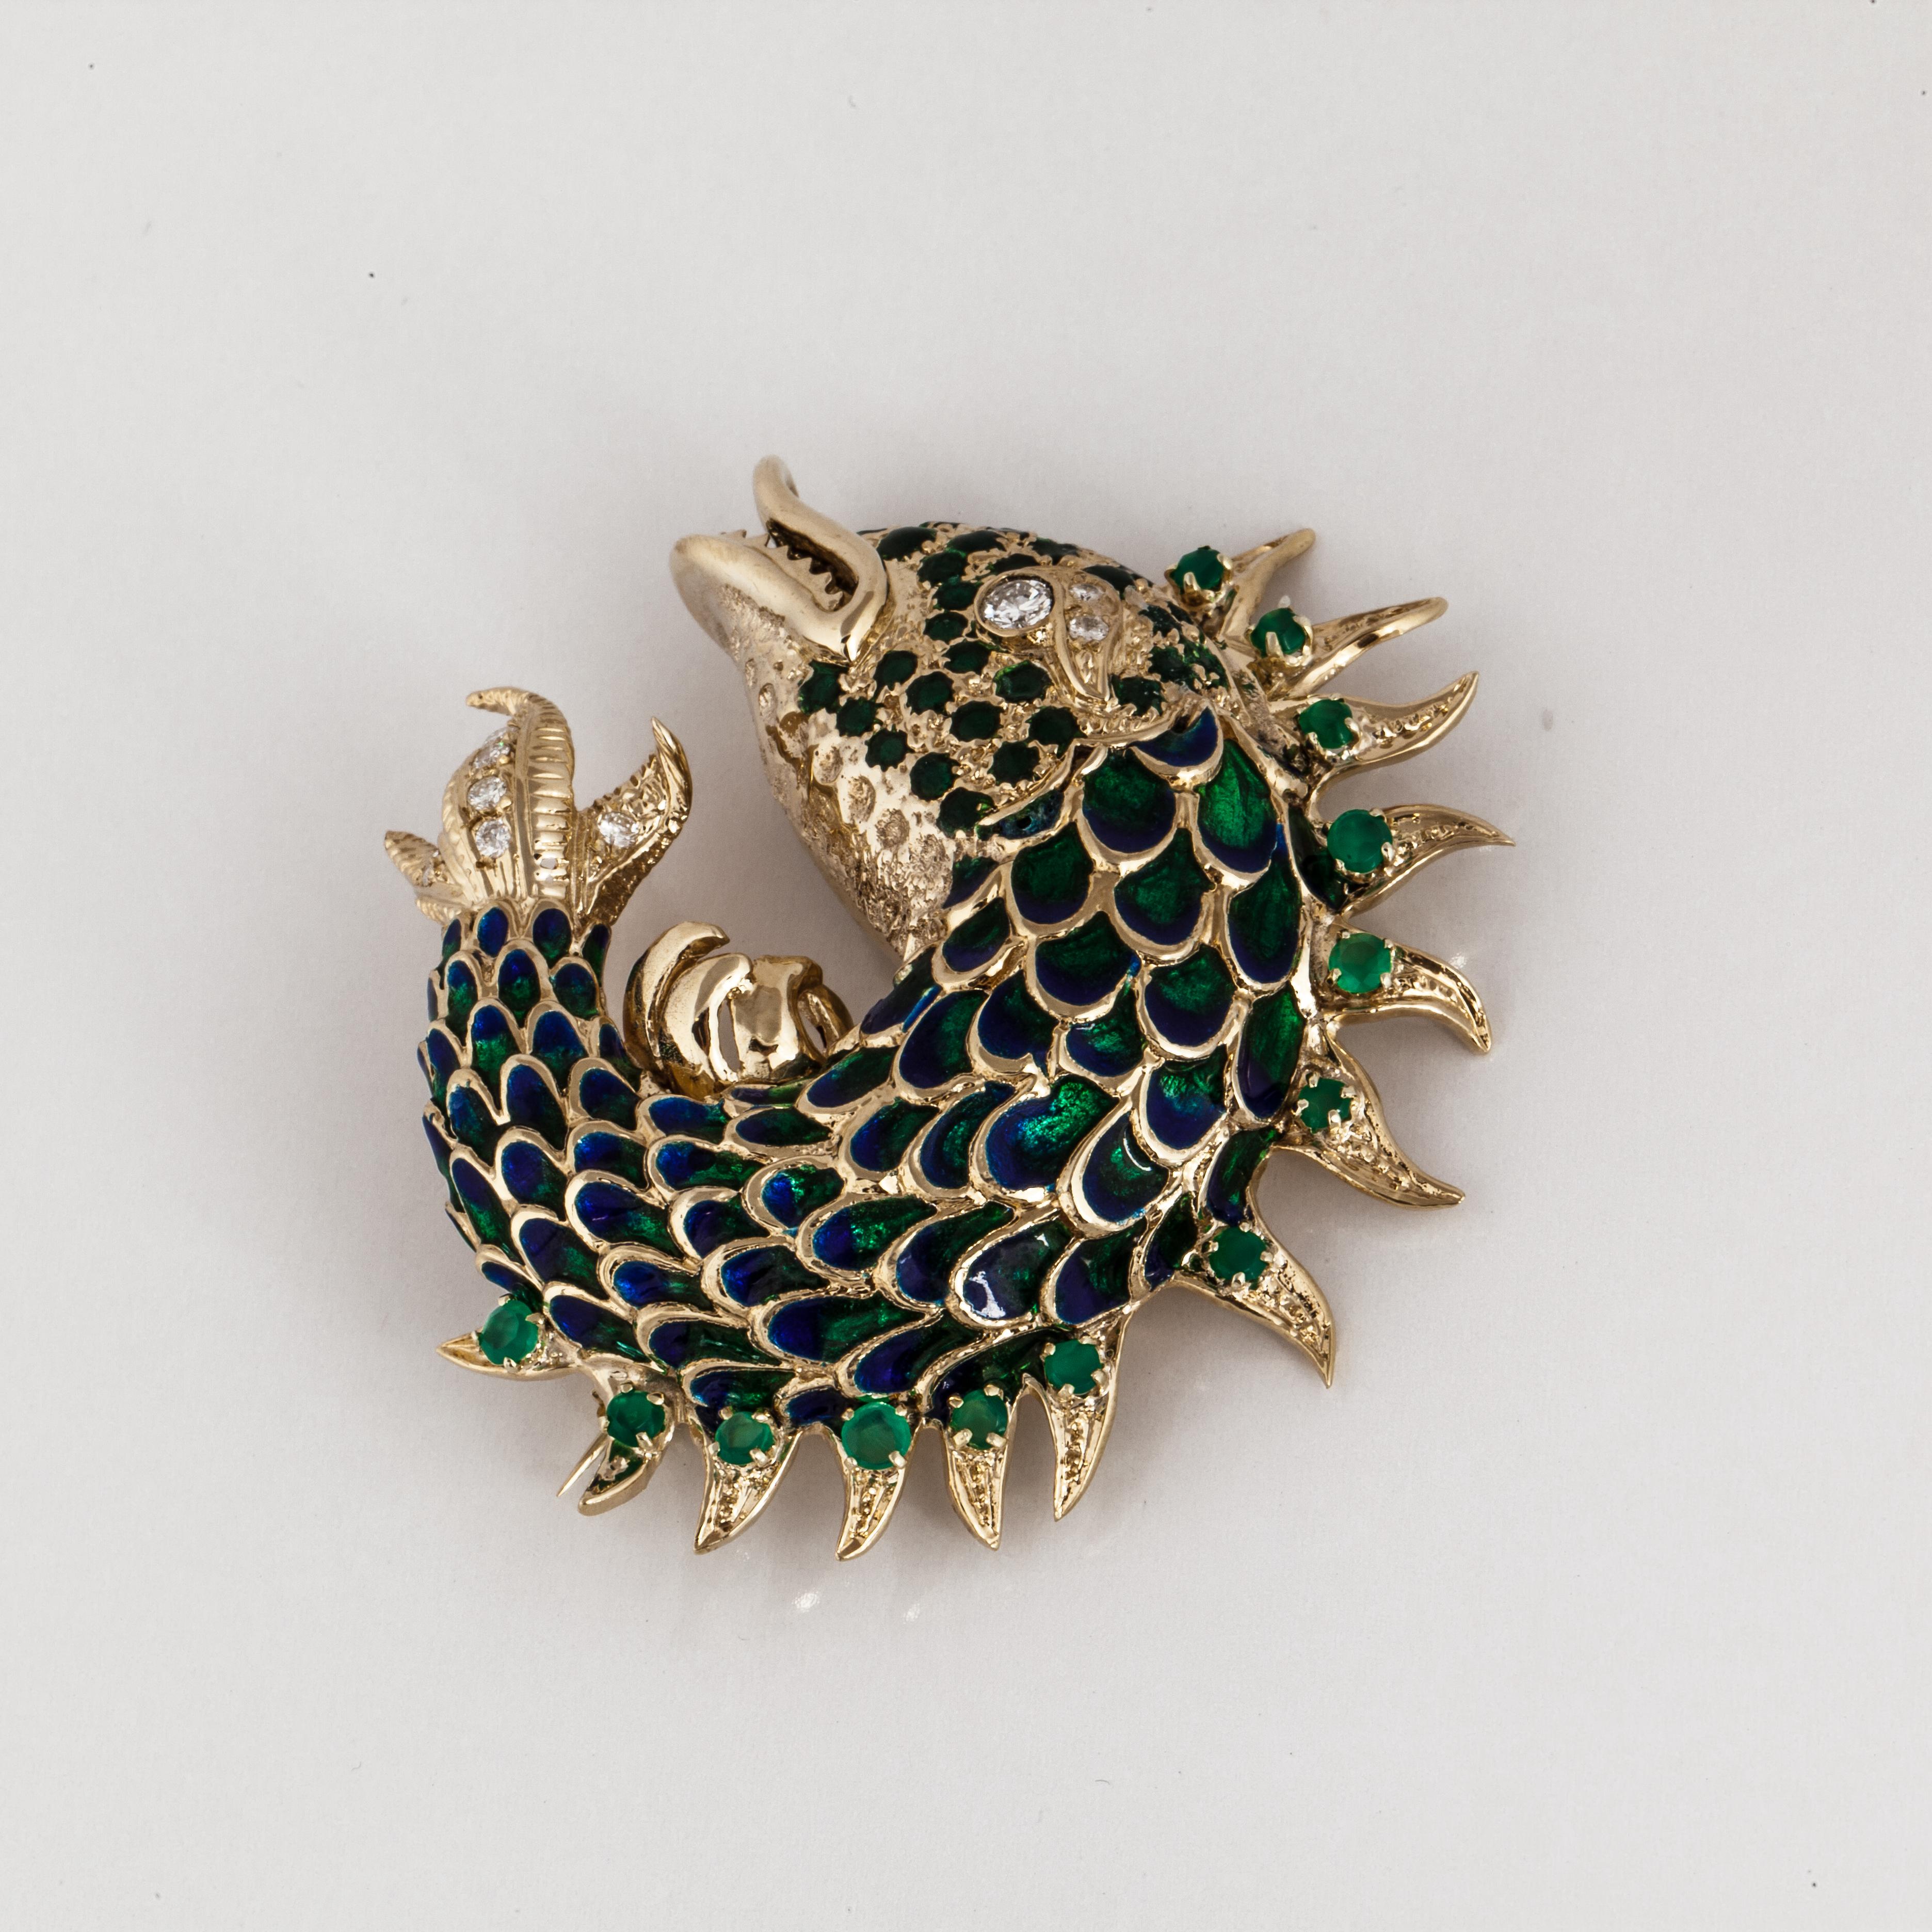 Plique-a-jour enamel fish brooch in blues and greens composed of 18K yellow gold.  The fish has a diamond eye and diamond accents.  There are nine round brilliant-cut diamonds that total 0.55 carats.  There are thirteen round chrysophrase stones set